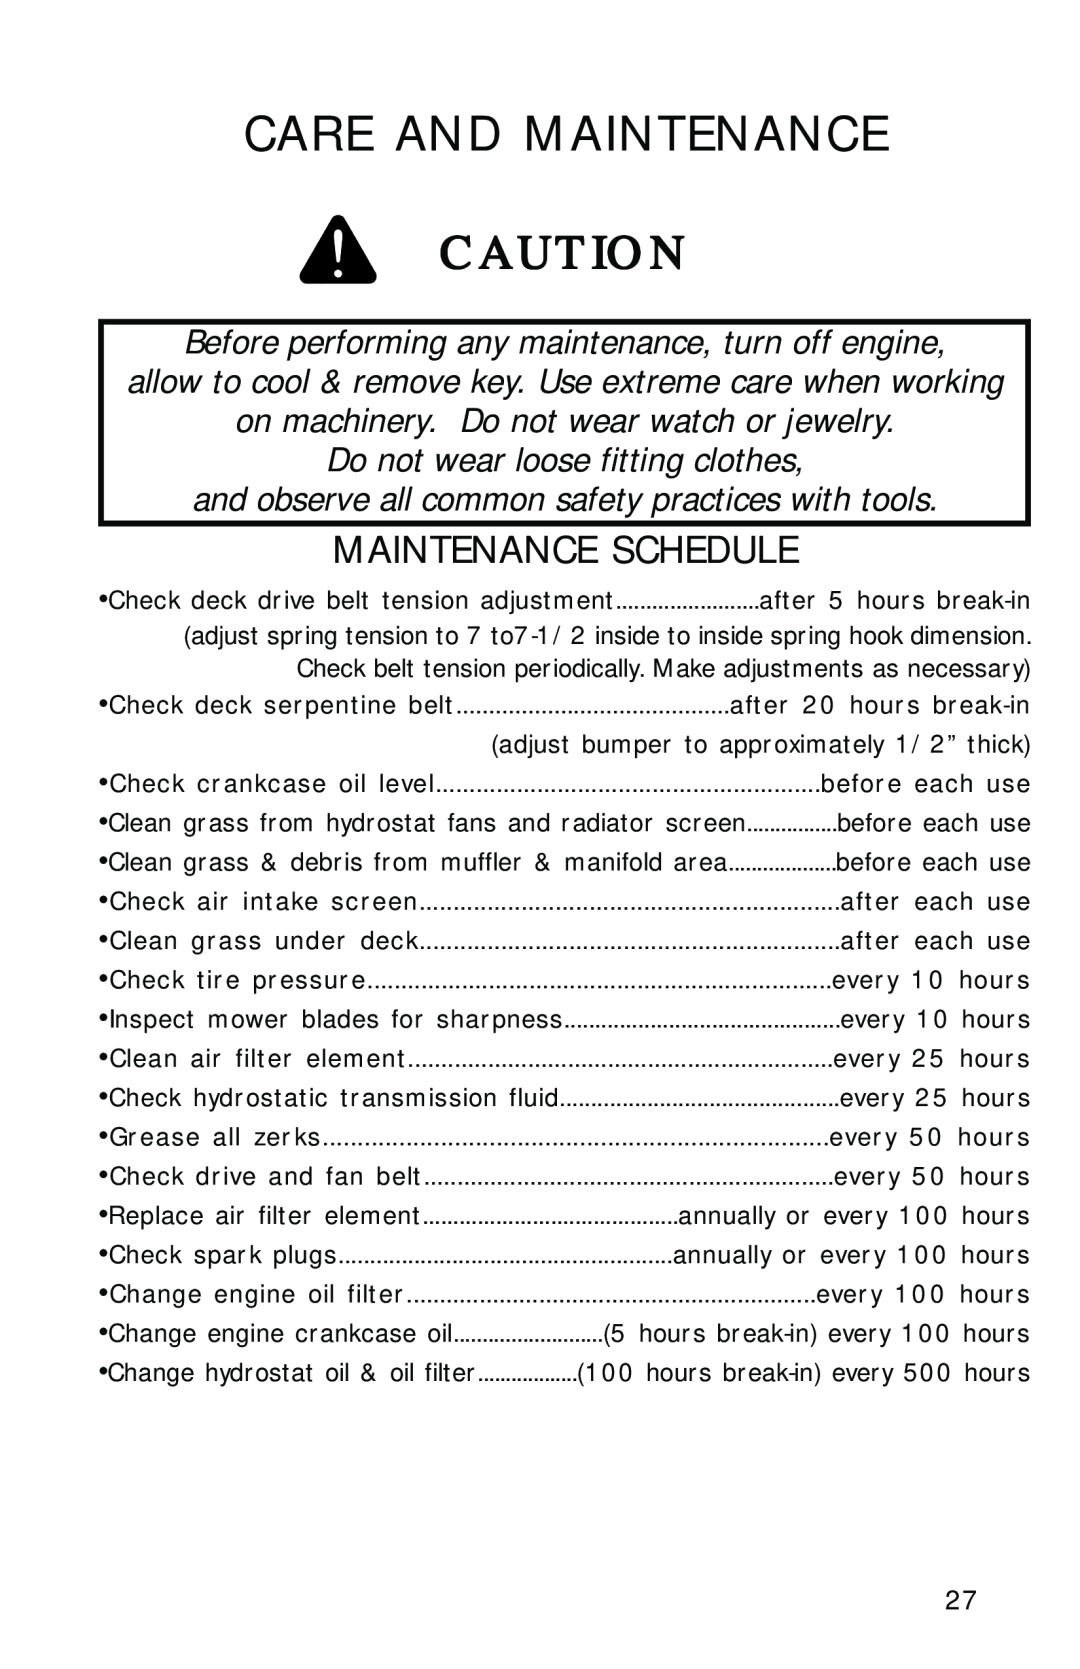 Dixon 2700 manual Care And Maintenance, Maintenance Schedule, on machinery. Do not wear watch or jewelry 